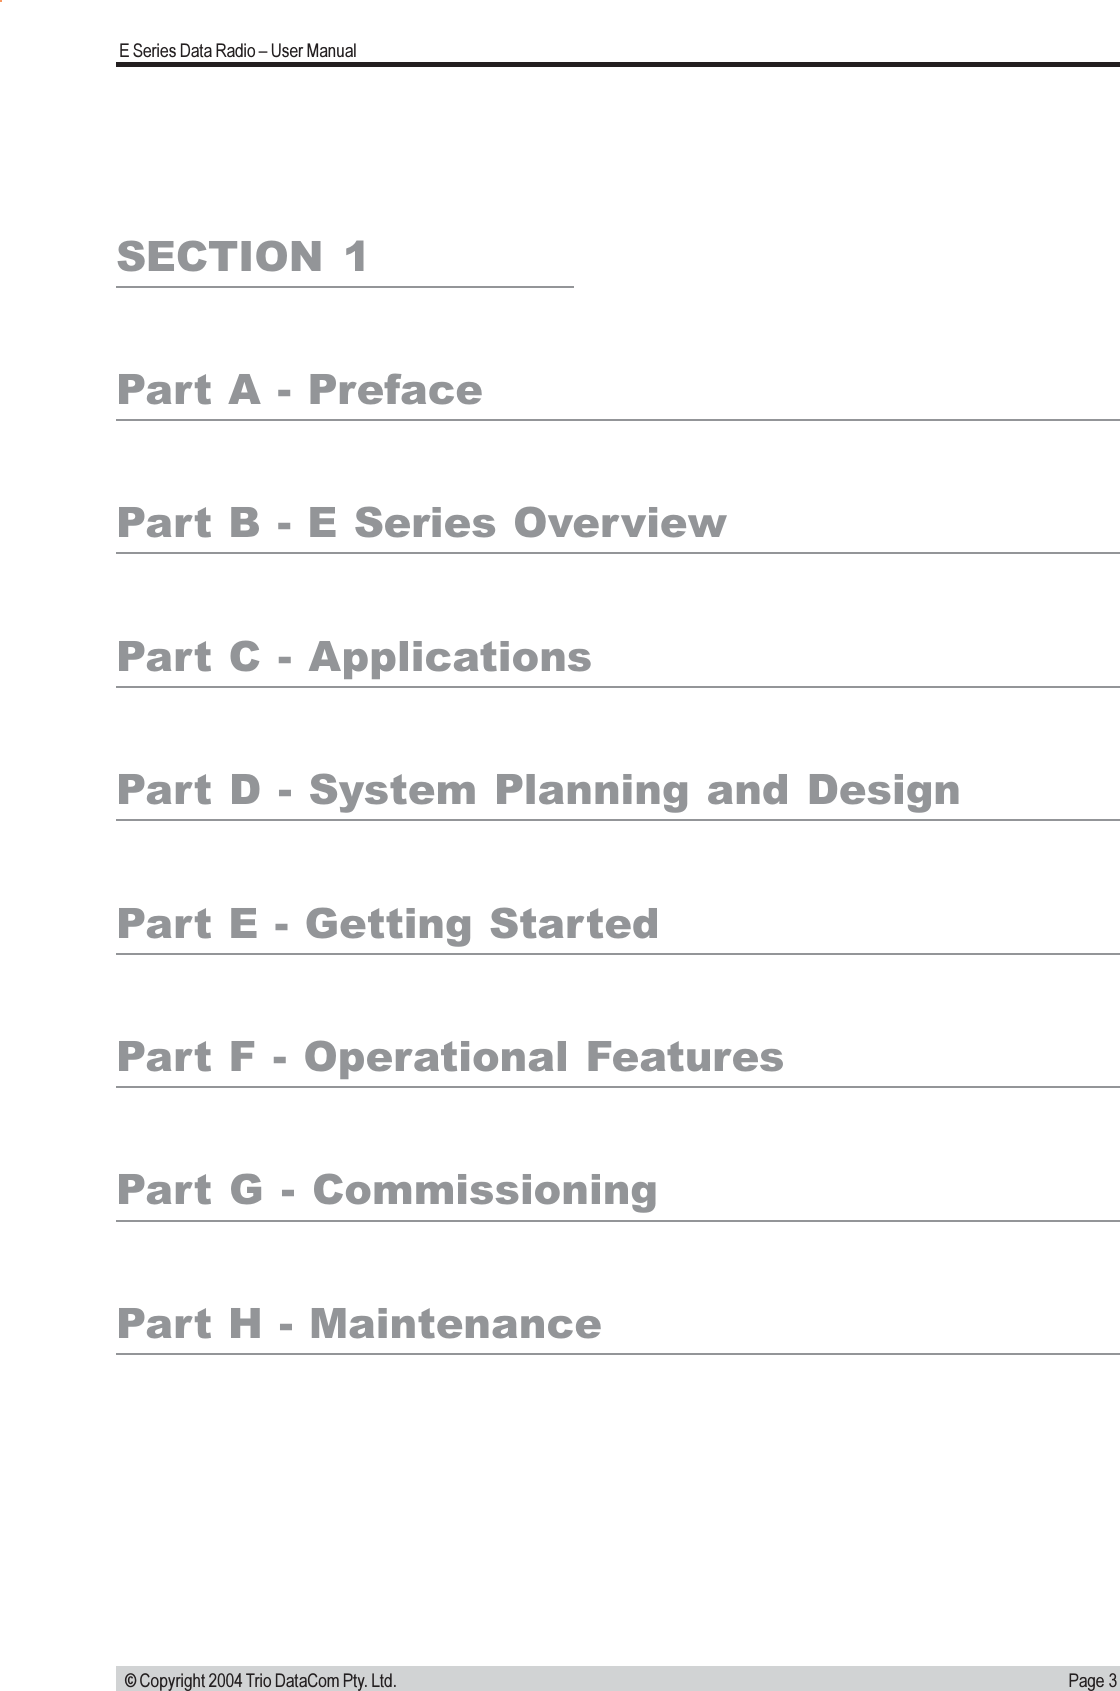 Page 3E Series Data Radio  User Manual © Copyright 2004 Trio DataCom Pty. Ltd.SECTION  1Part A - PrefacePart B - E Series OverviewPart C - ApplicationsPart D - System Planning and DesignPart E - Getting StartedPart F - Operational FeaturesPart G - CommissioningPart H - Maintenance